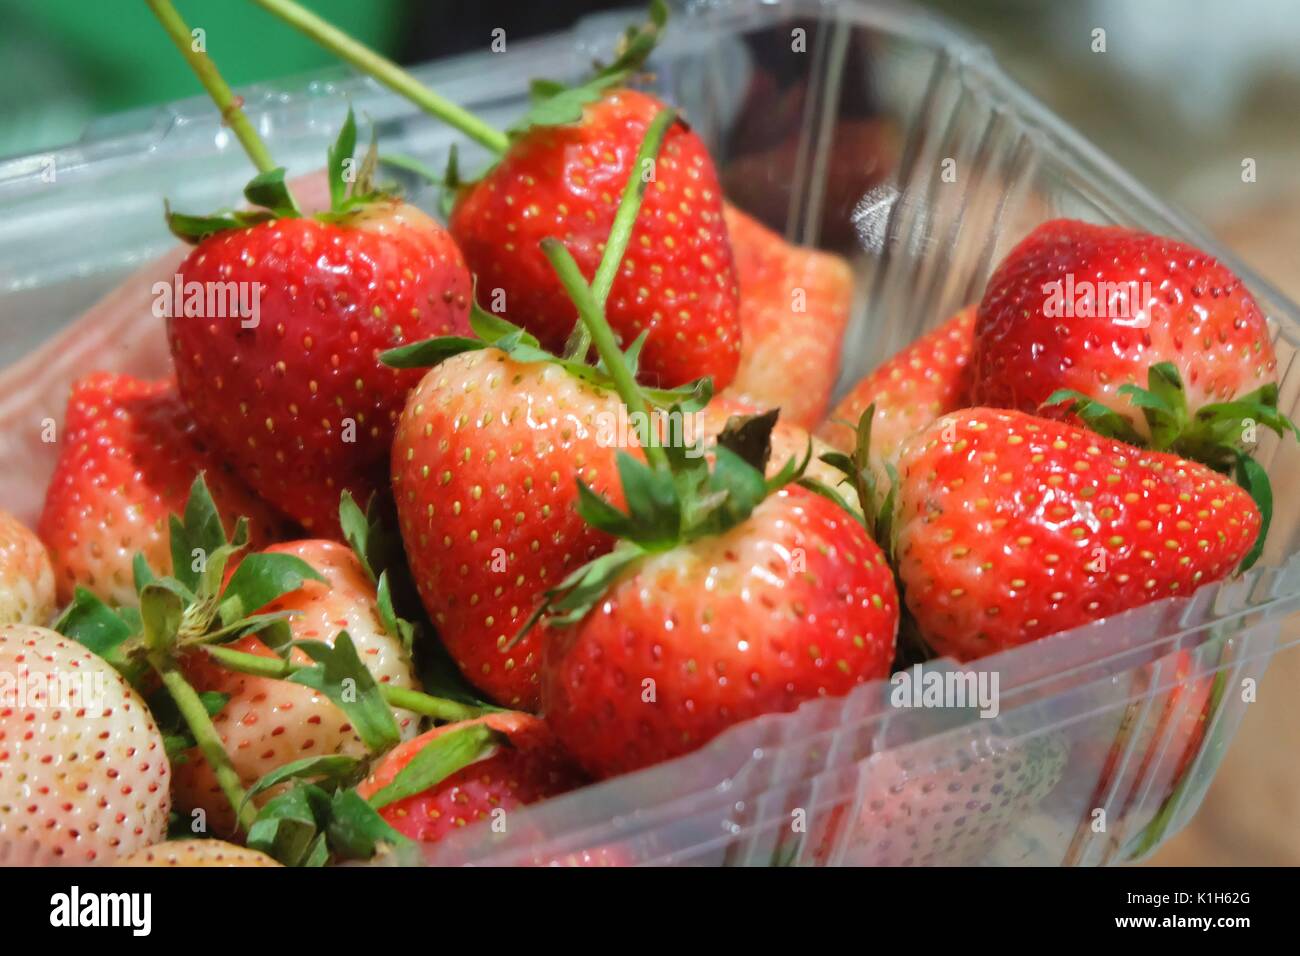 Fresh Fruit, Close Up of Ripe and Sweet Strawberry in Plastic Box, High in Vitamin C Tablet, Essential Nutrient for Life. Stock Photo